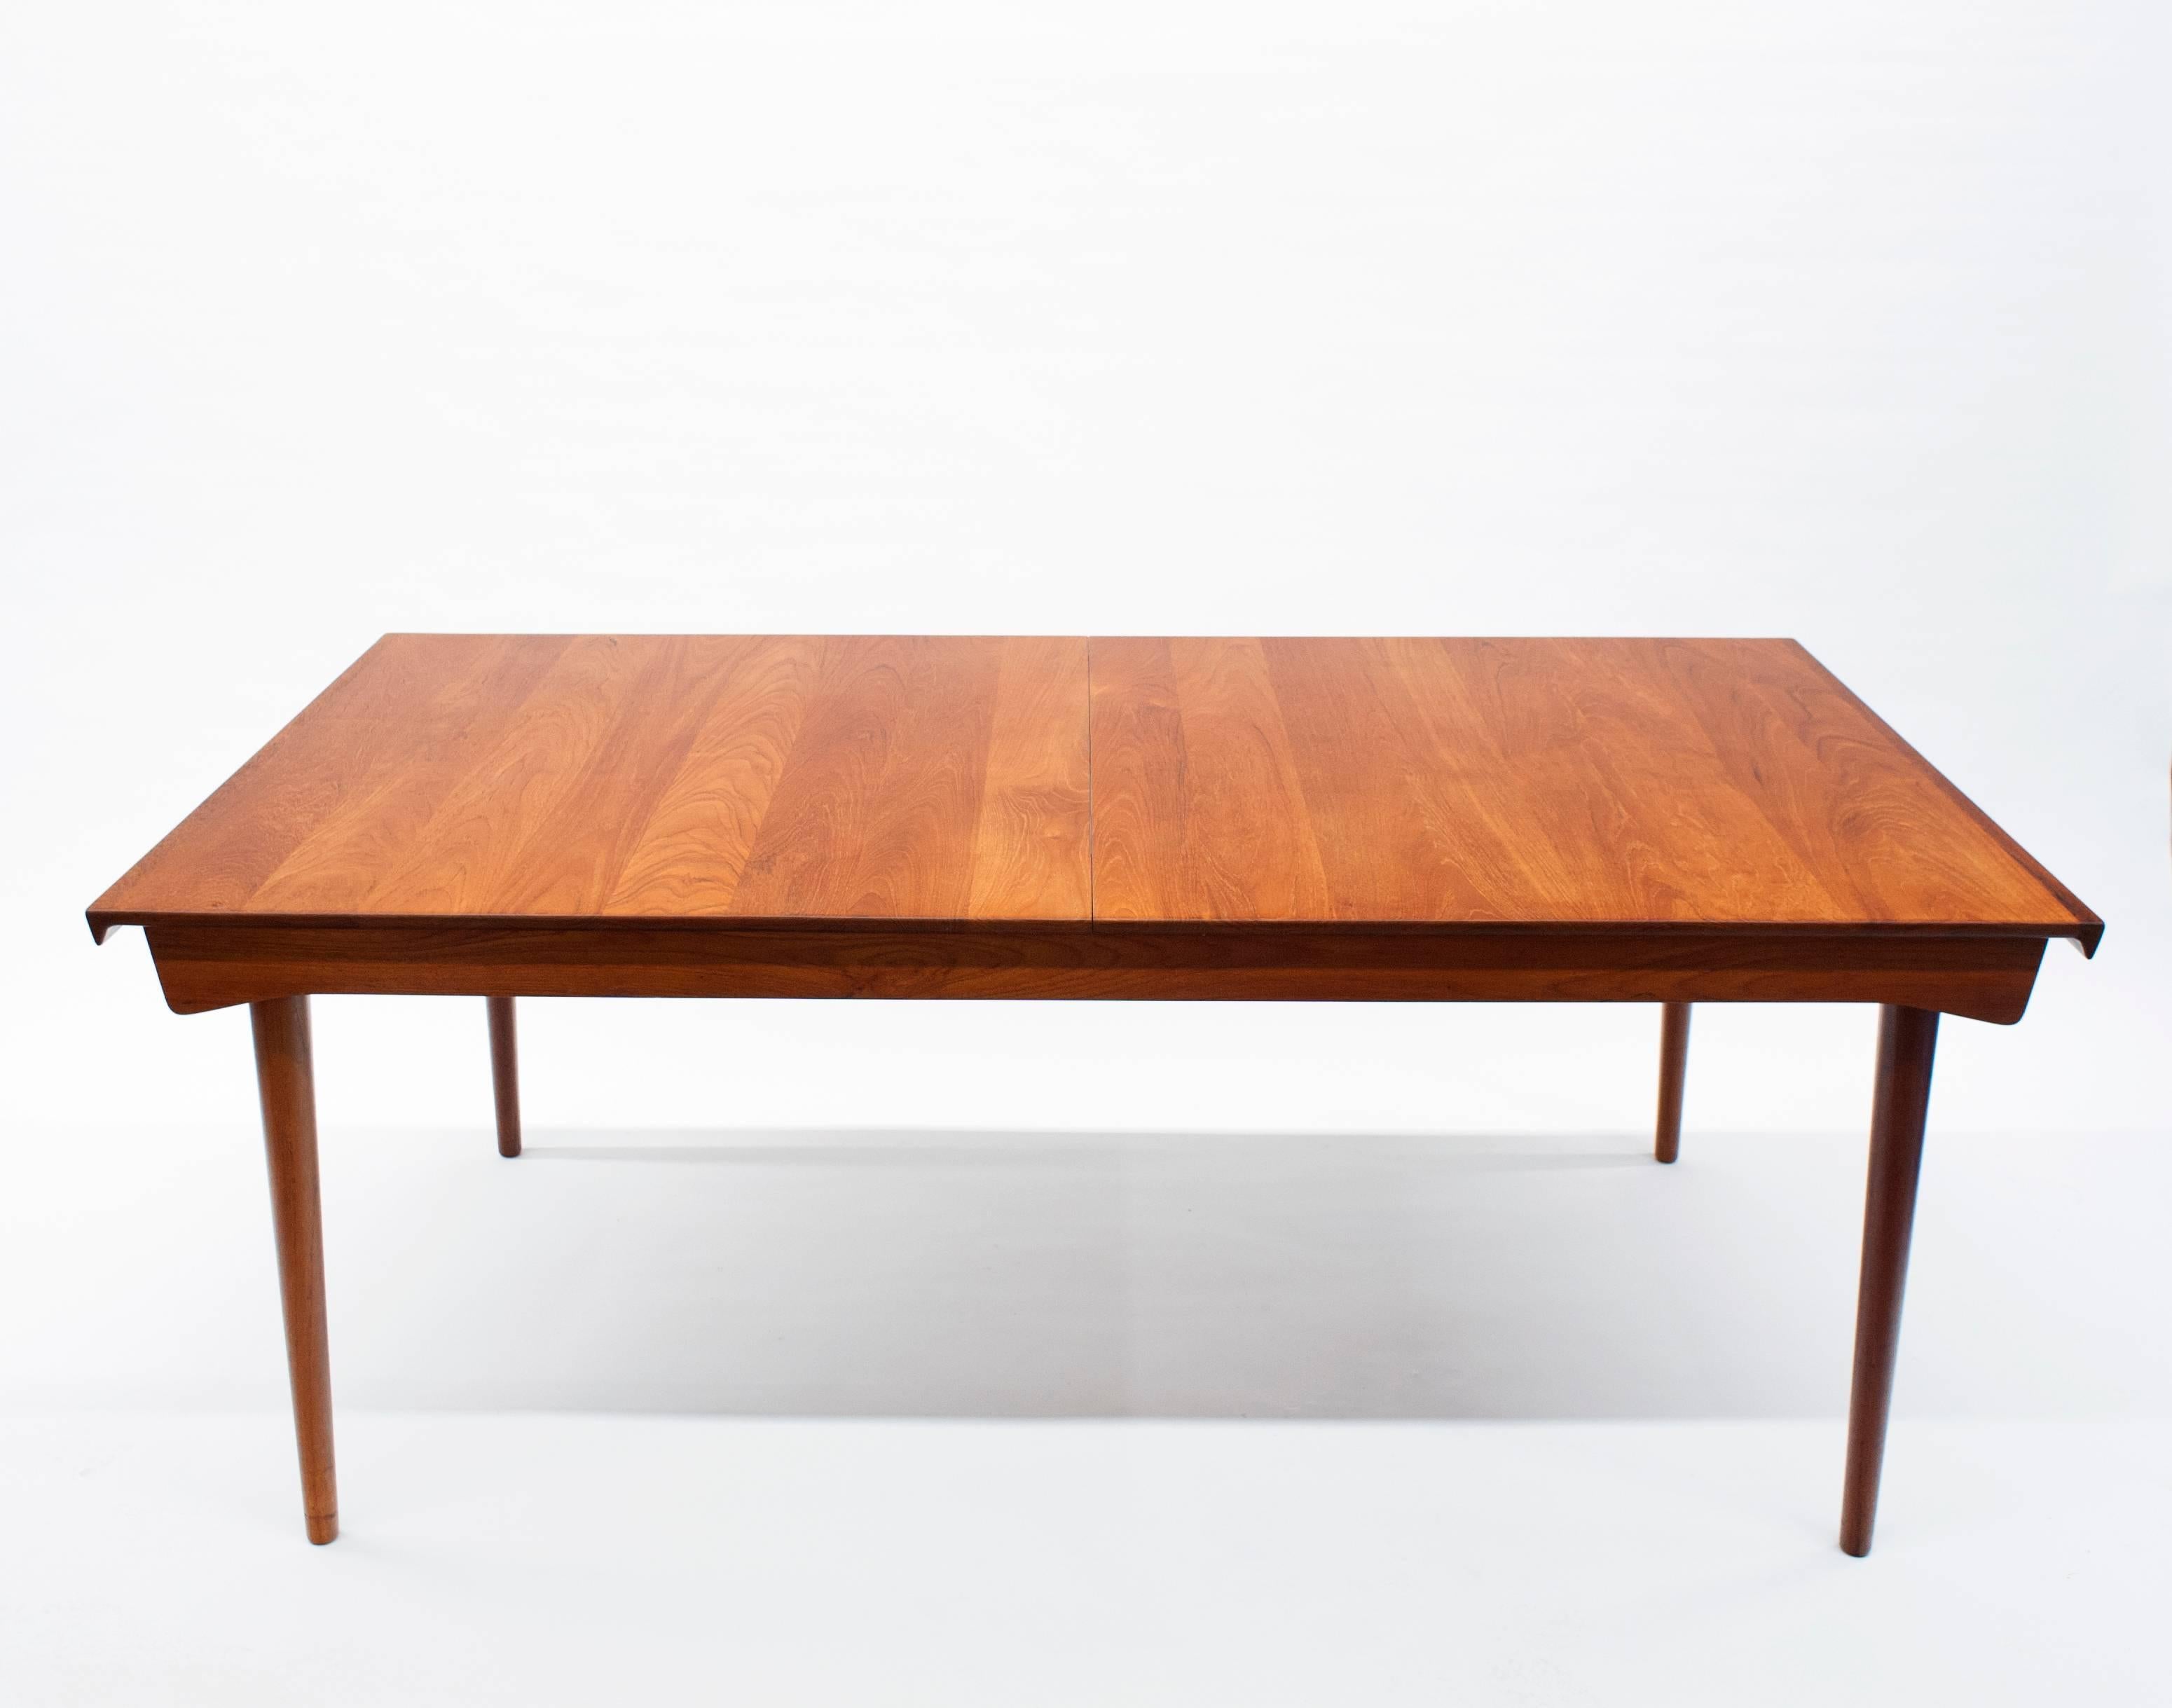 Beautifully designed and constructed dining table by Danish master designer Finn Juhl. Table comes with two original leaves that are stored within the table.
Table measures 72 W x 39.5 D x 28.5 H. Each leaf is 19.5 W. Fully extended table is 112